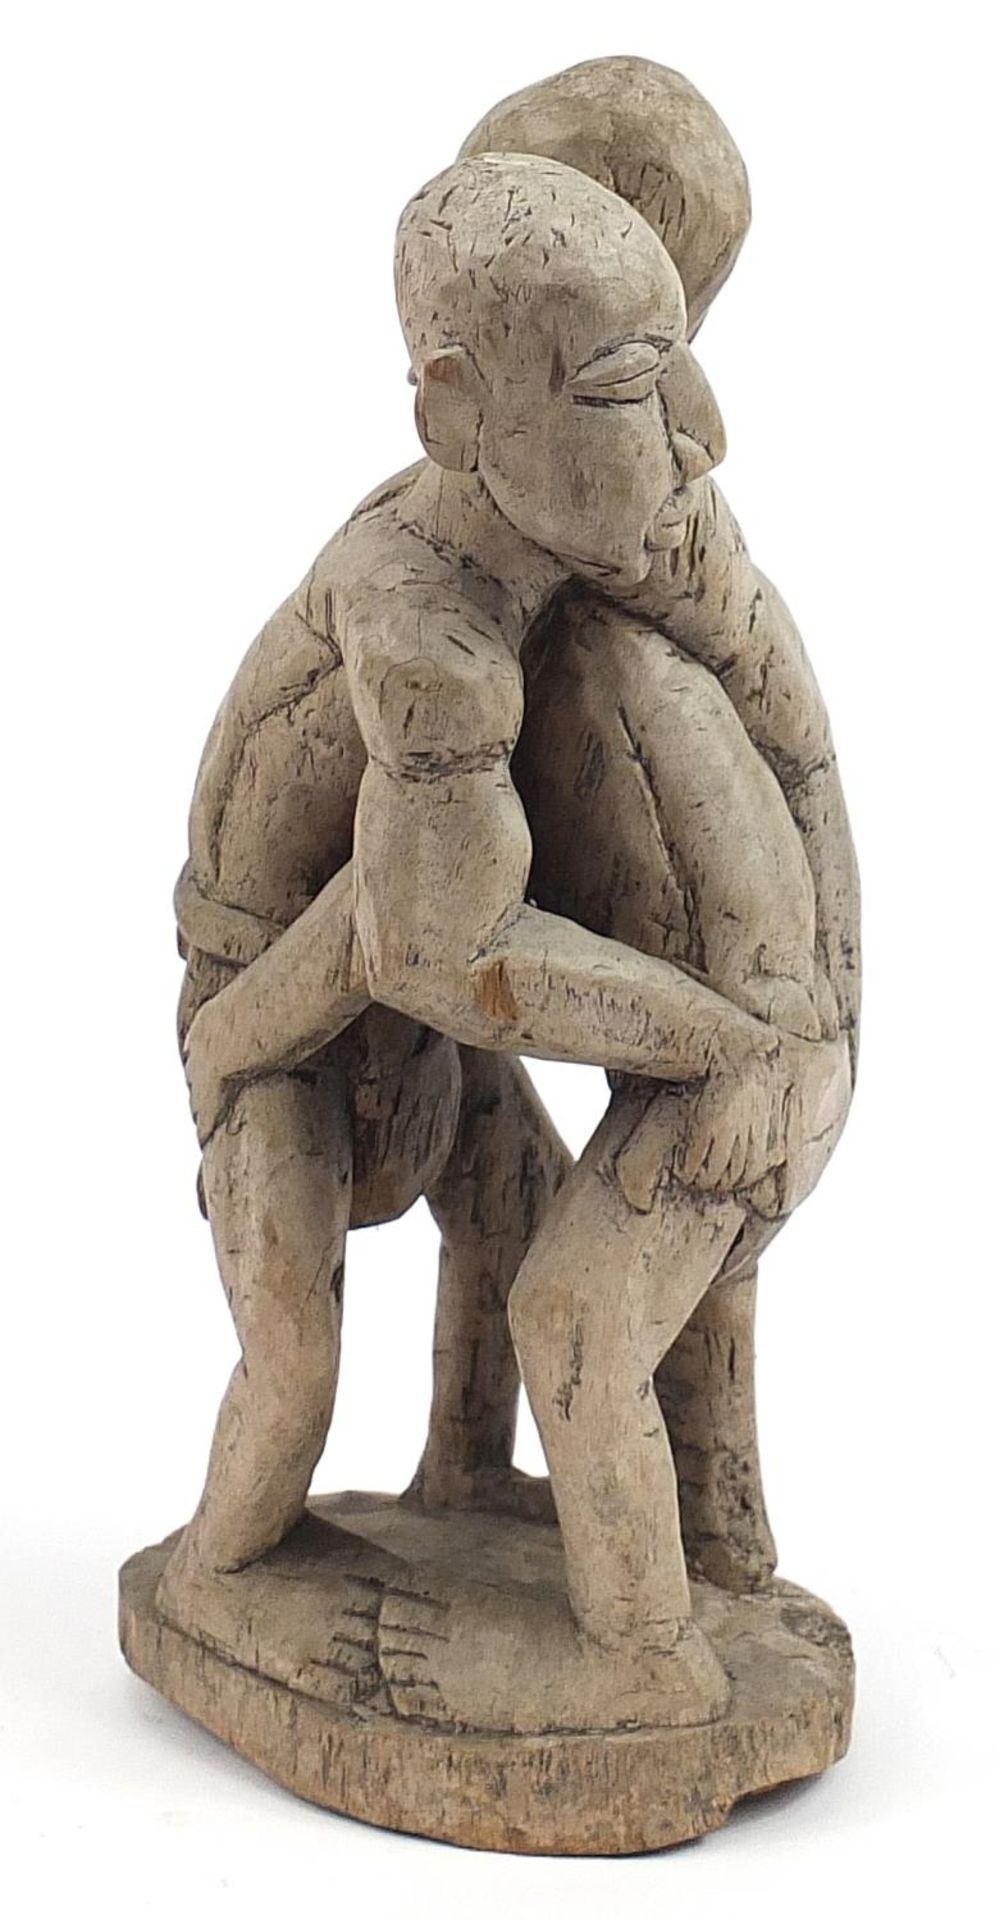 Tribal interest wood carving of two tribesmen wrestling, 40cm high - Image 2 of 3